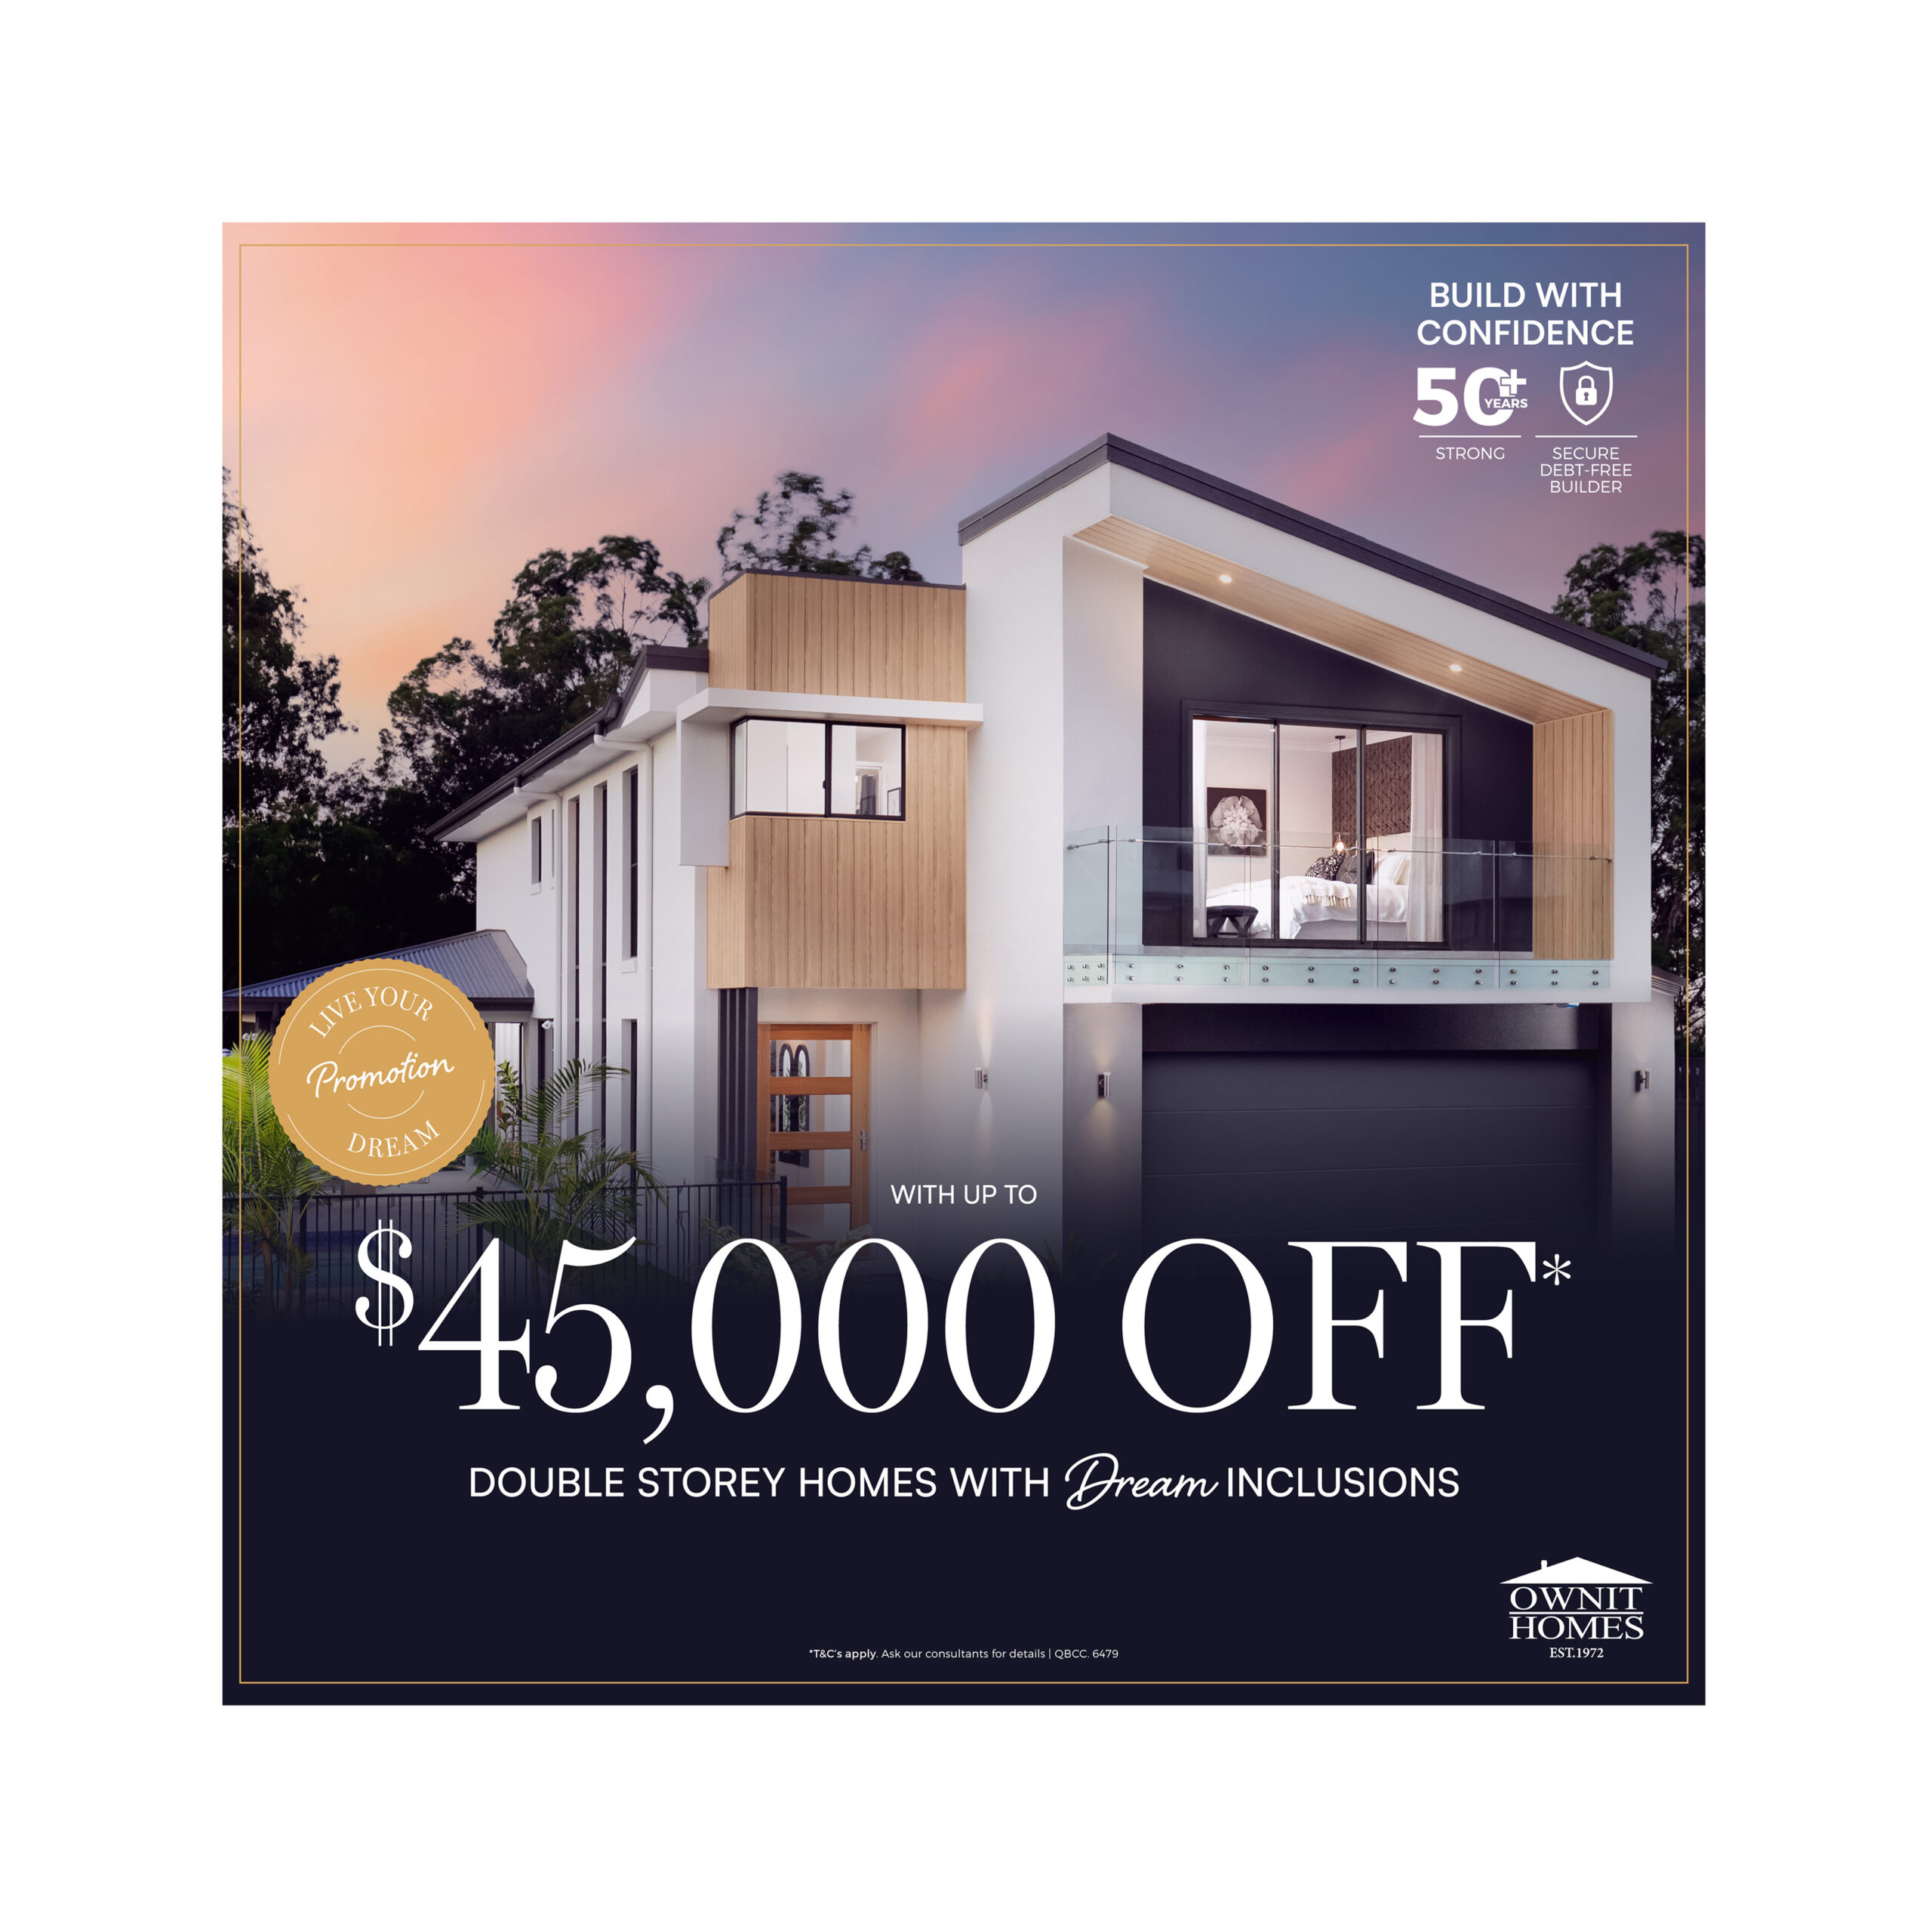 Marketing Image for Up to $45,000* off Double Storey Homes with Dream Inclusions promotion